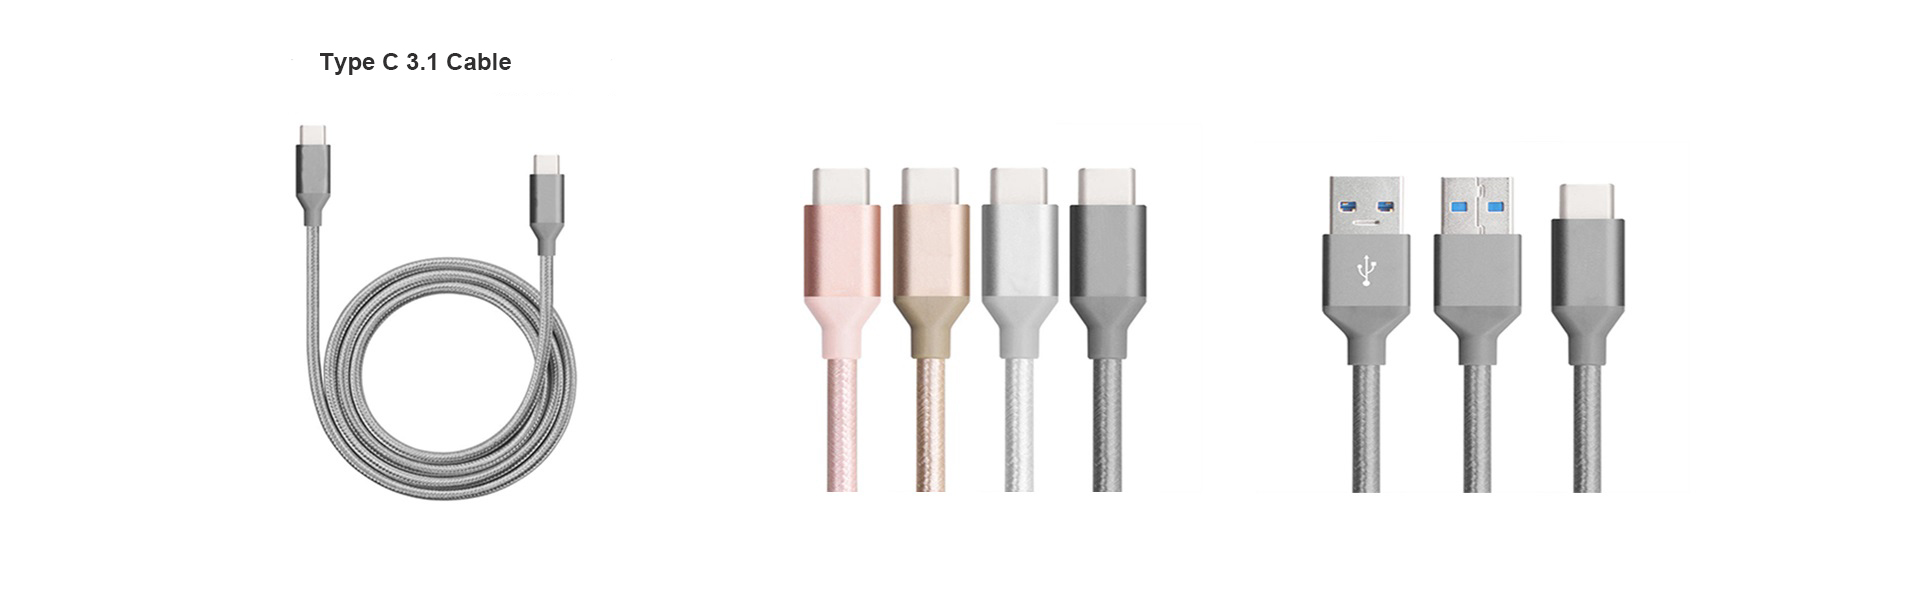 Type C USB Cable professional producing